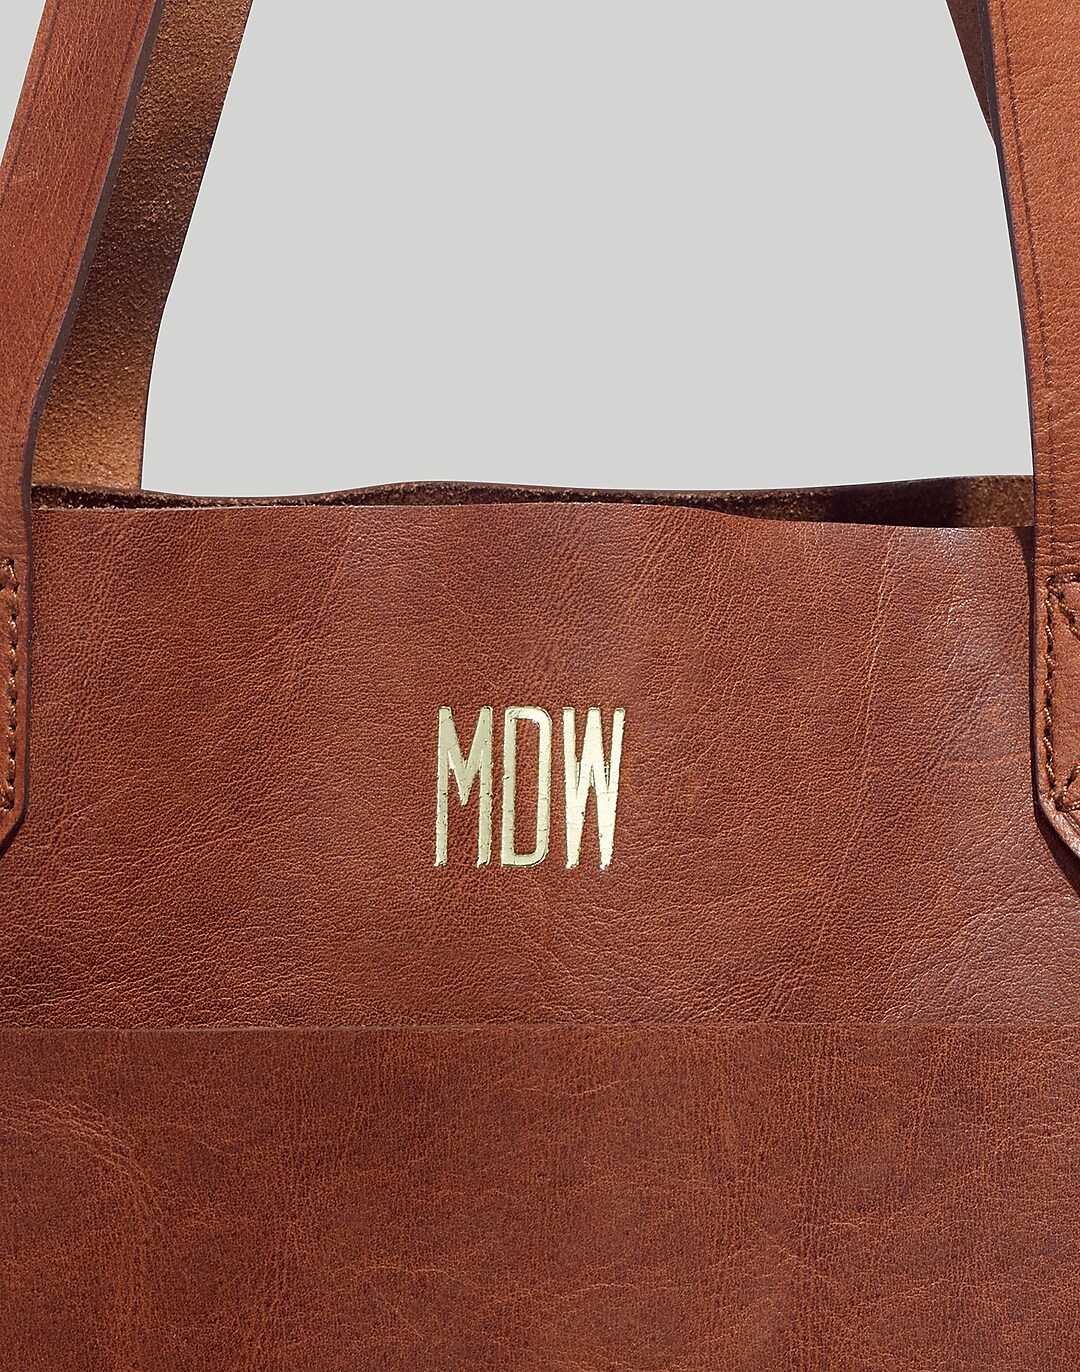 Honest Madewell Medium Transport Tote Review (Plus Size Perspective) - The  Plus Life